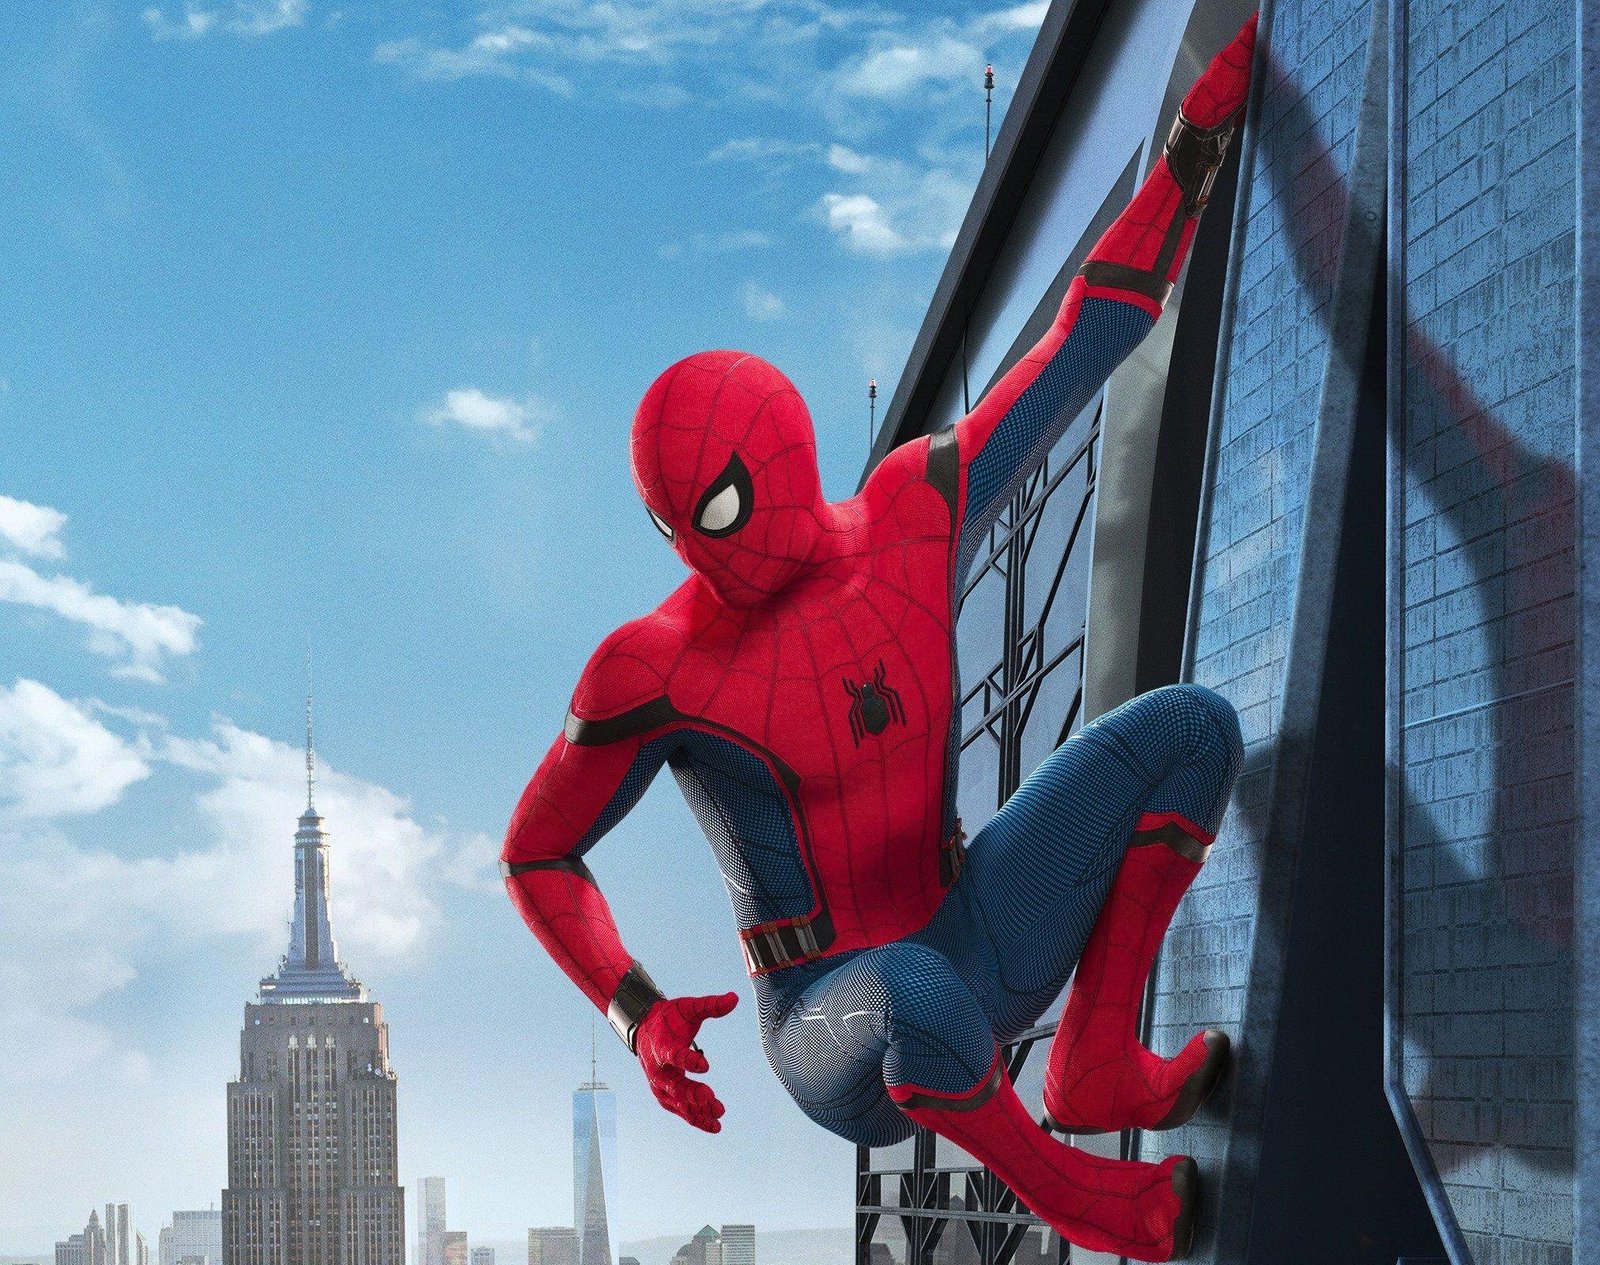 Spider-man Homecoming :- Tom Holland /Spiderman (Credit - Marvel Studios & Sony pictures)